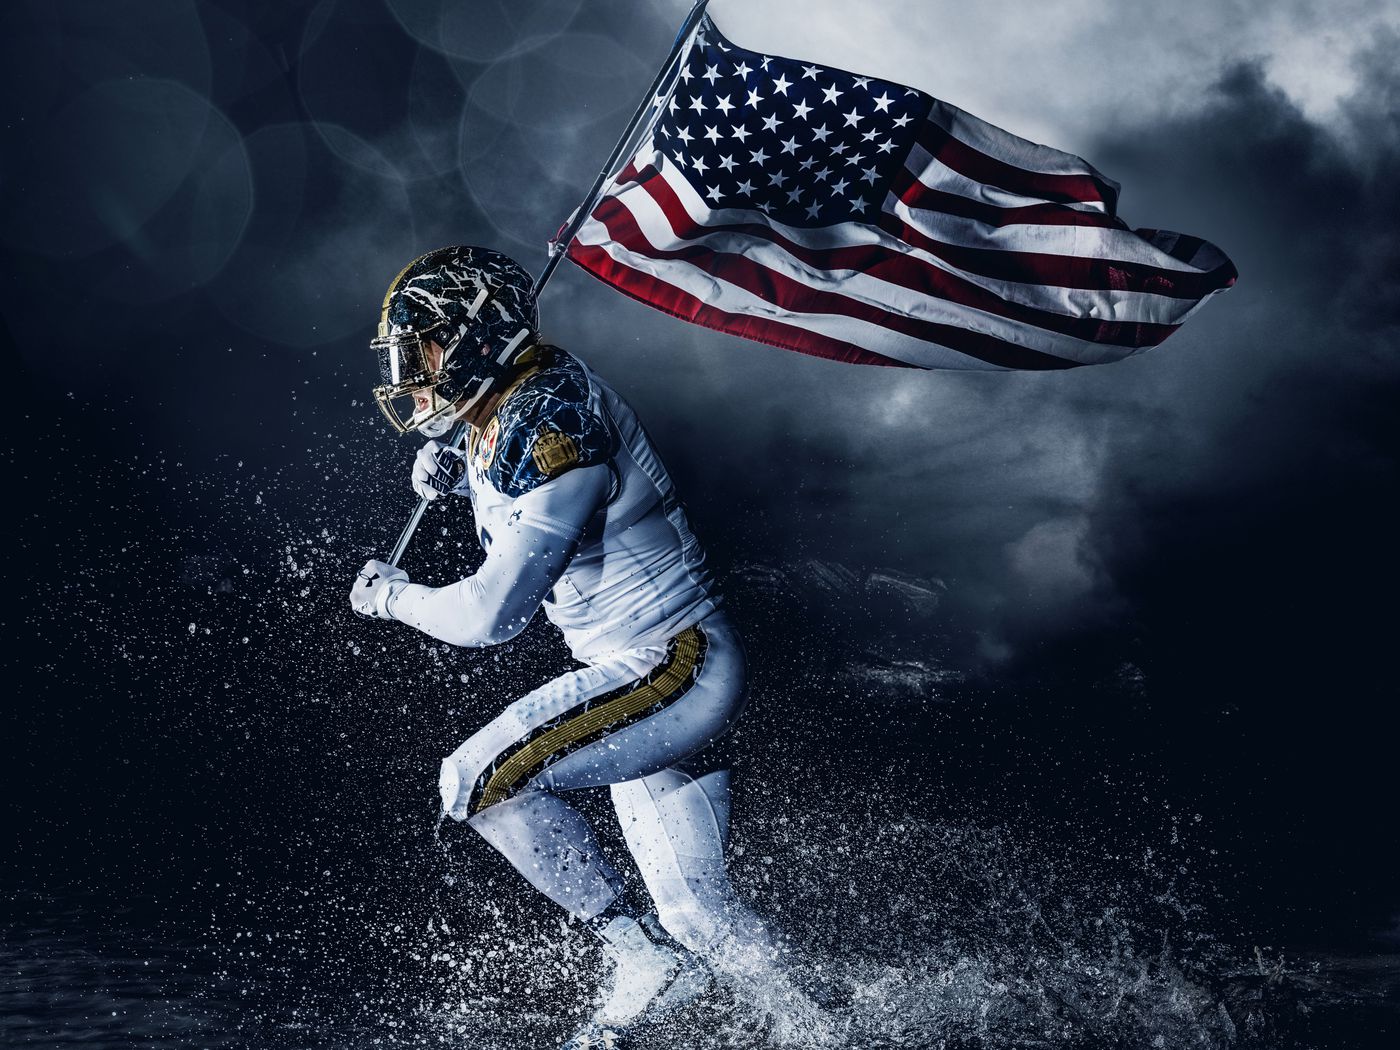 College football: Navy reveals 175th anniversary uniforms for Army game All Enemies